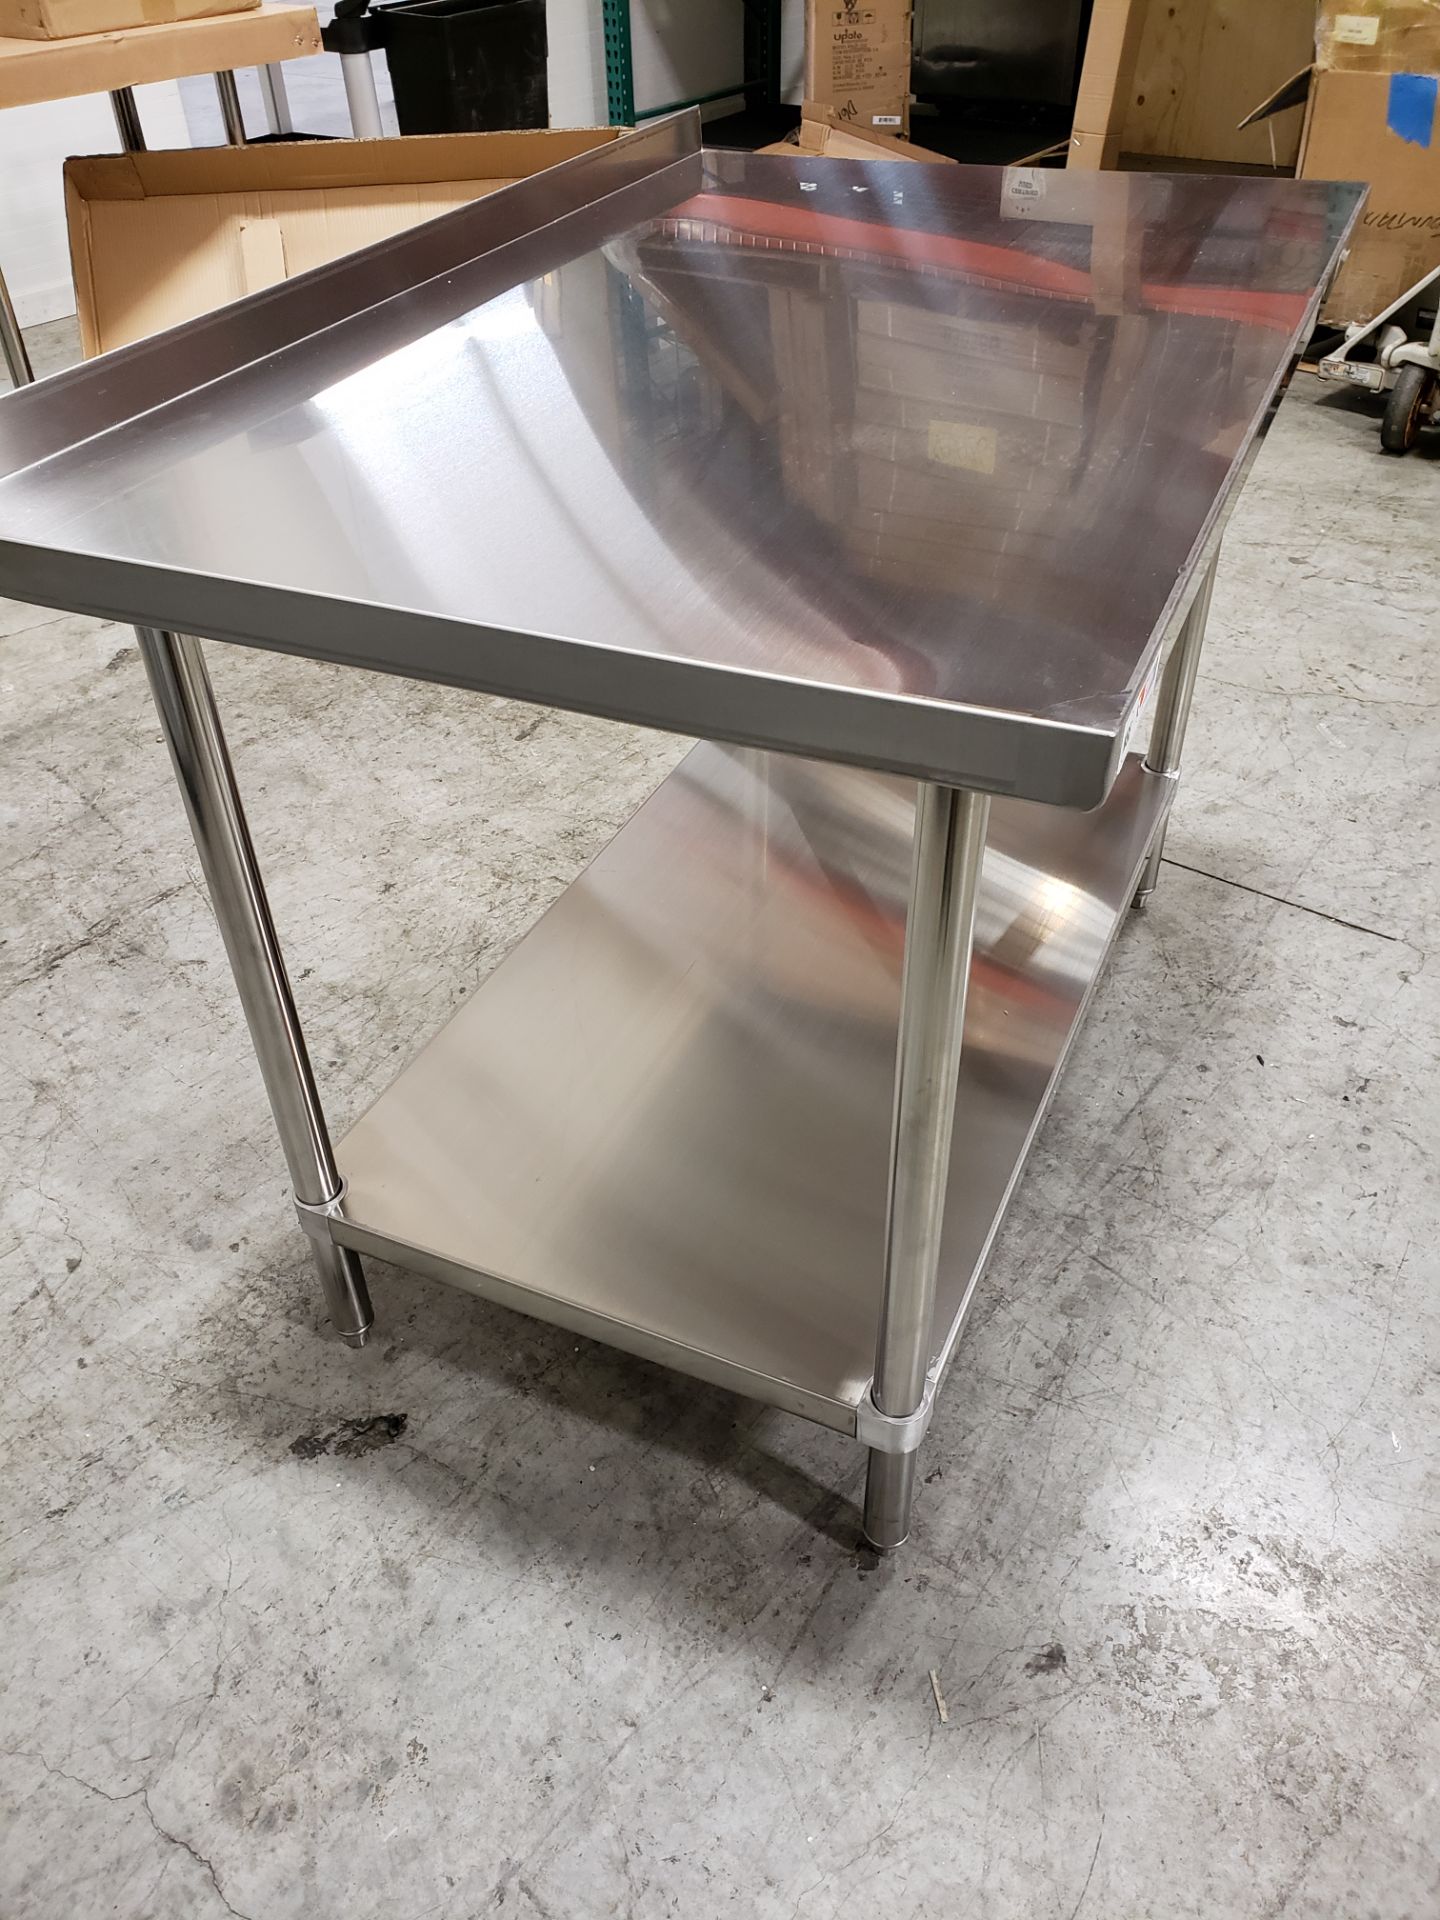 48" x 30" All Stainless Work Table with 1.5" Back Splash - 34" High - Image 2 of 3